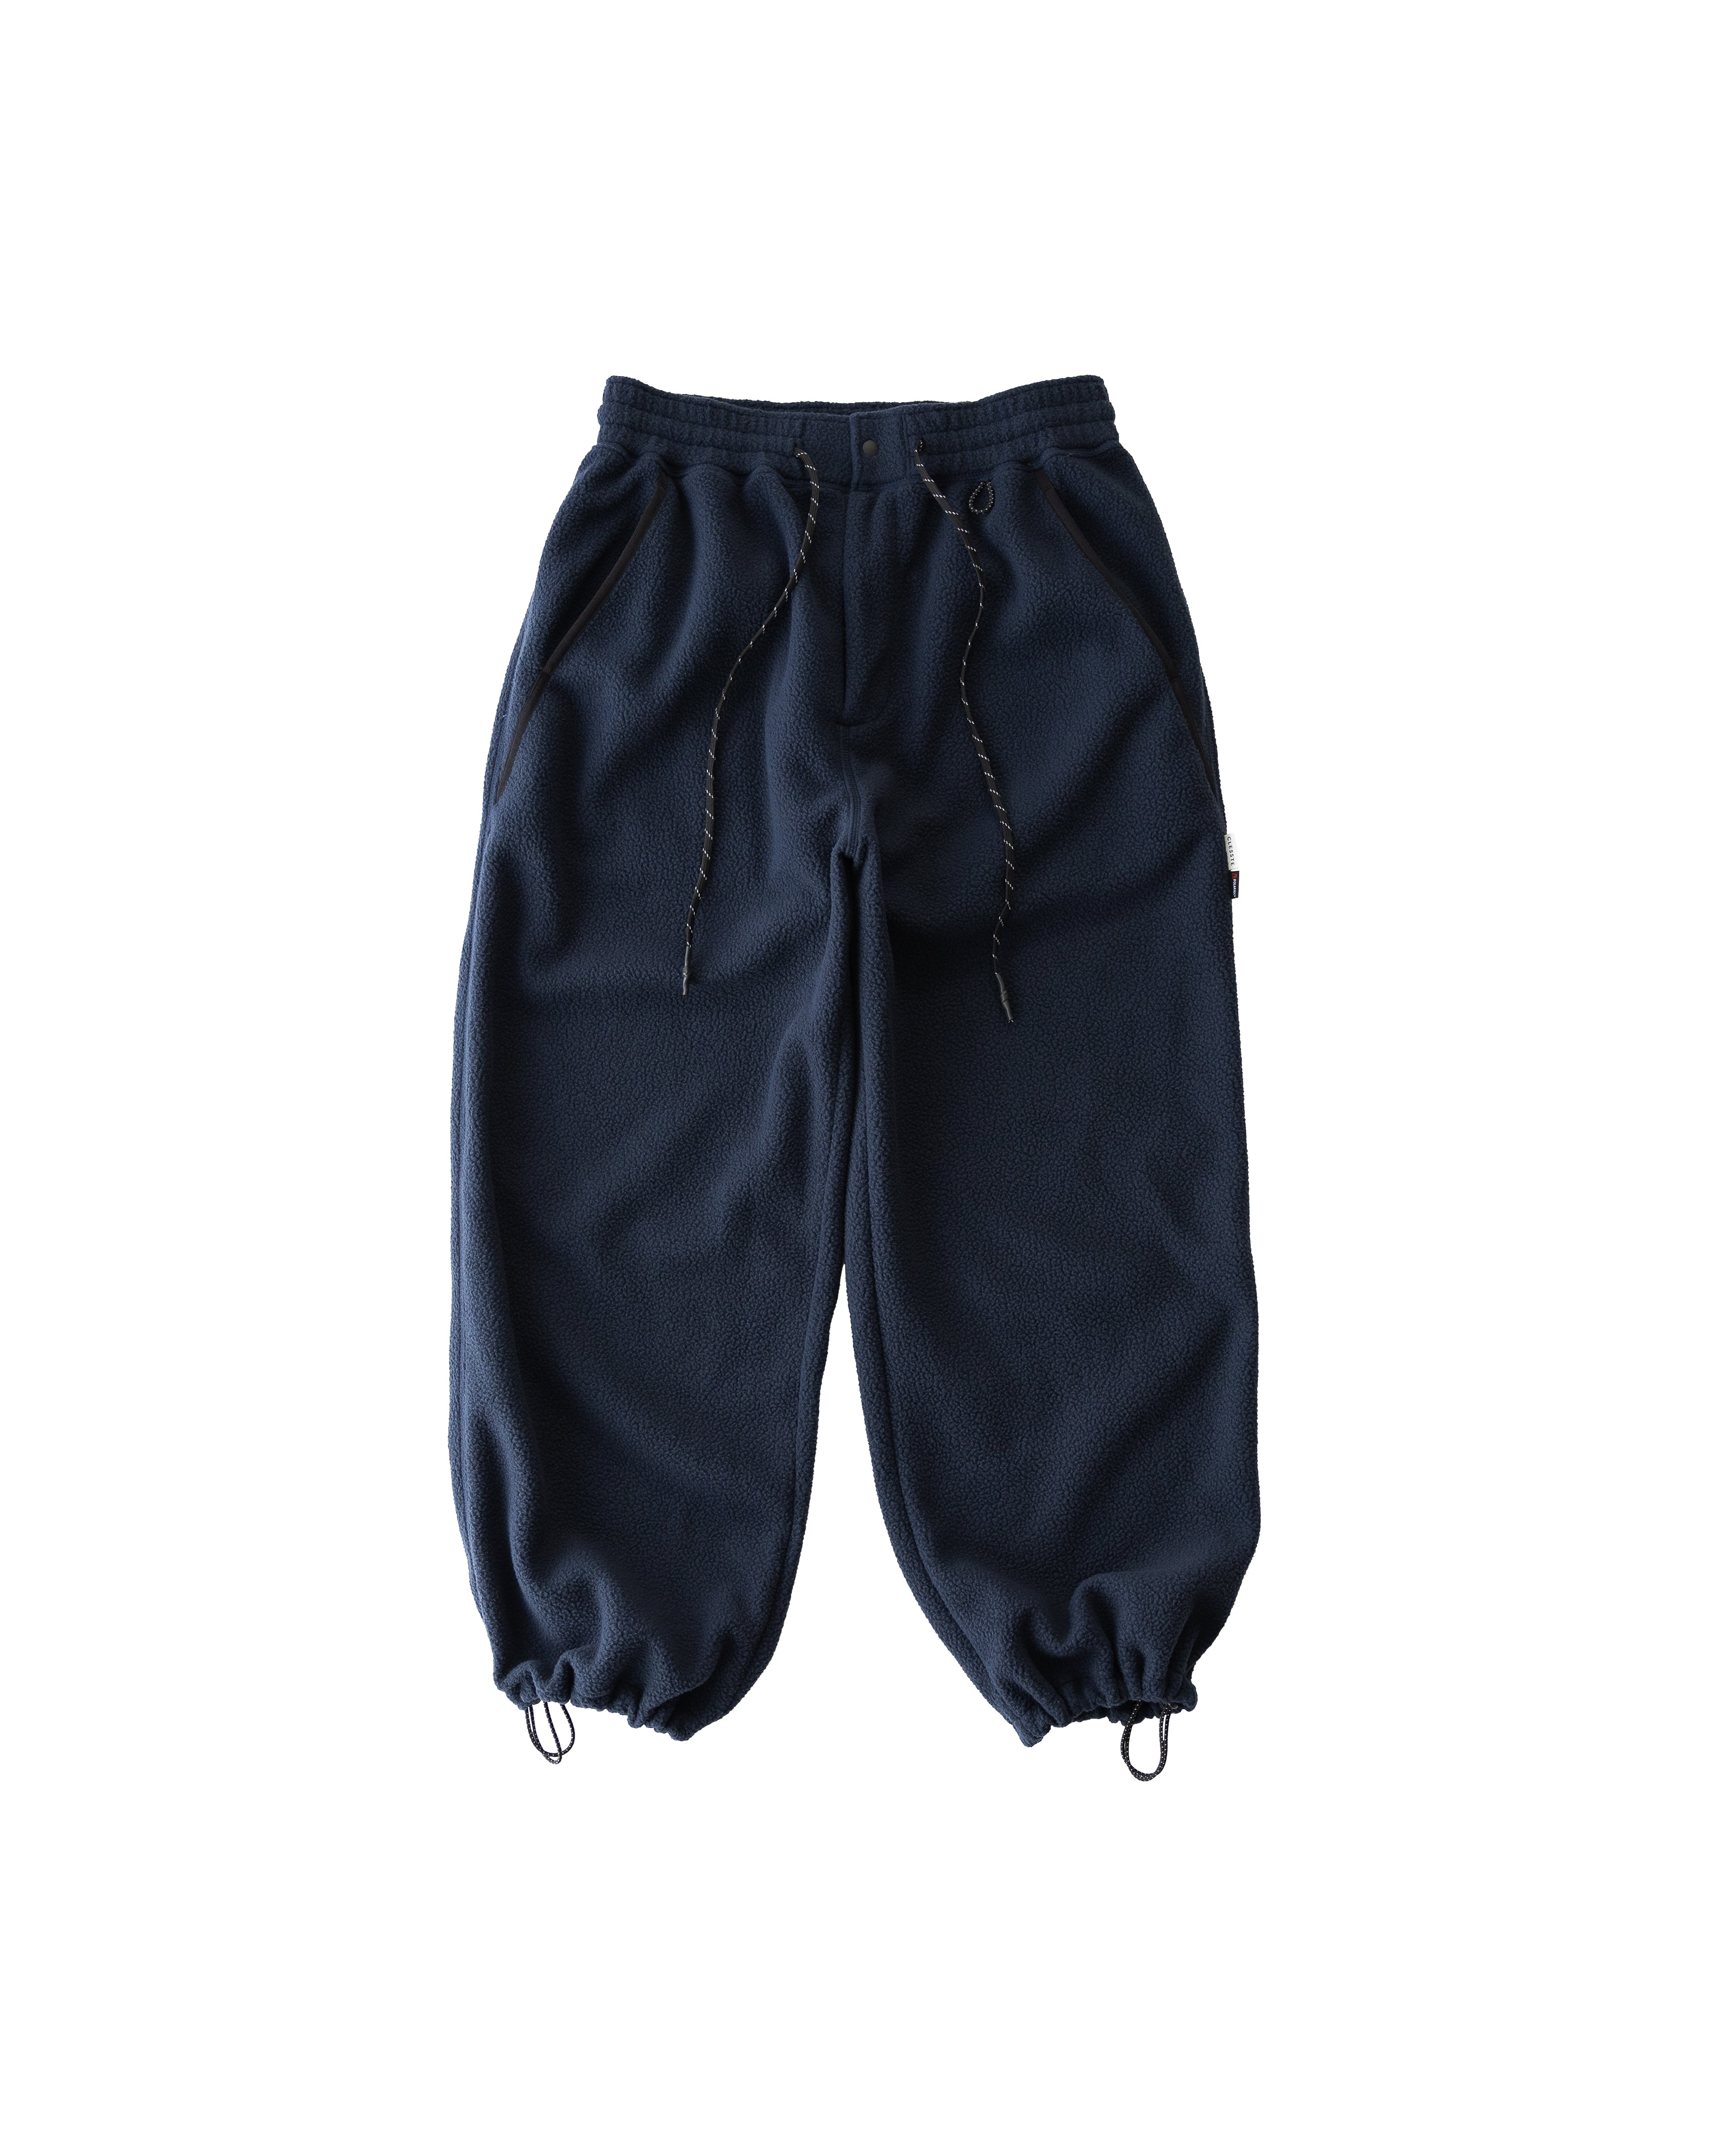 size1the clesste active city pants - ワークパンツ/カーゴパンツ